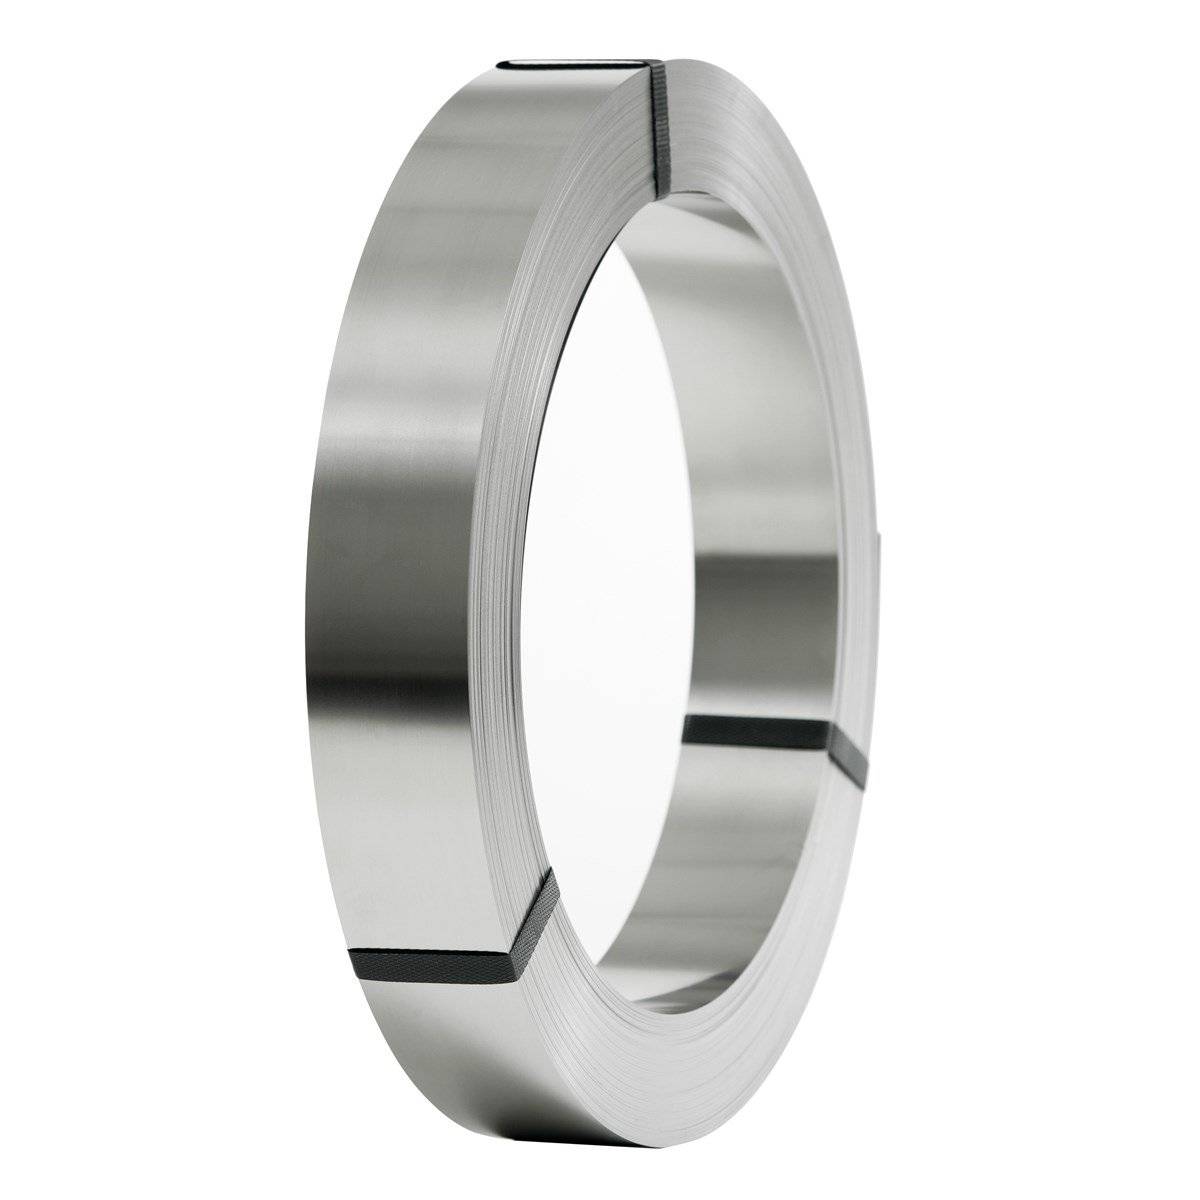 Short Lead Time for 430 Stainless Steel Strip - SUS430 2B stainless steel strip hot selling inox 430 BA steel – Swiny